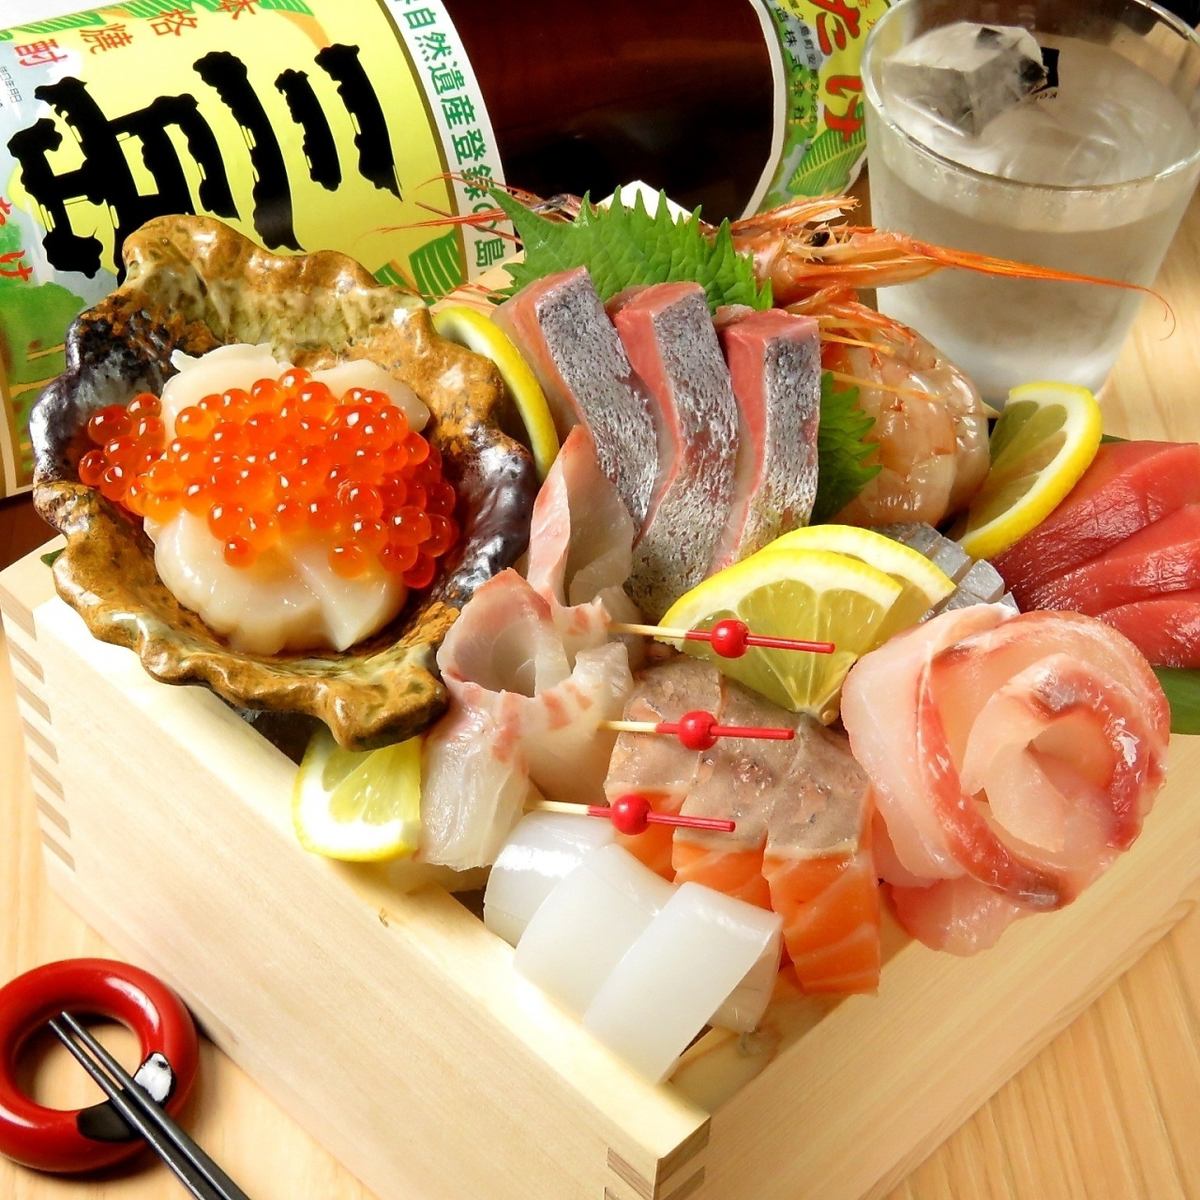 Tenjin area ★ Enjoy fresh fish and Hakata specialties in an adult atmosphere!